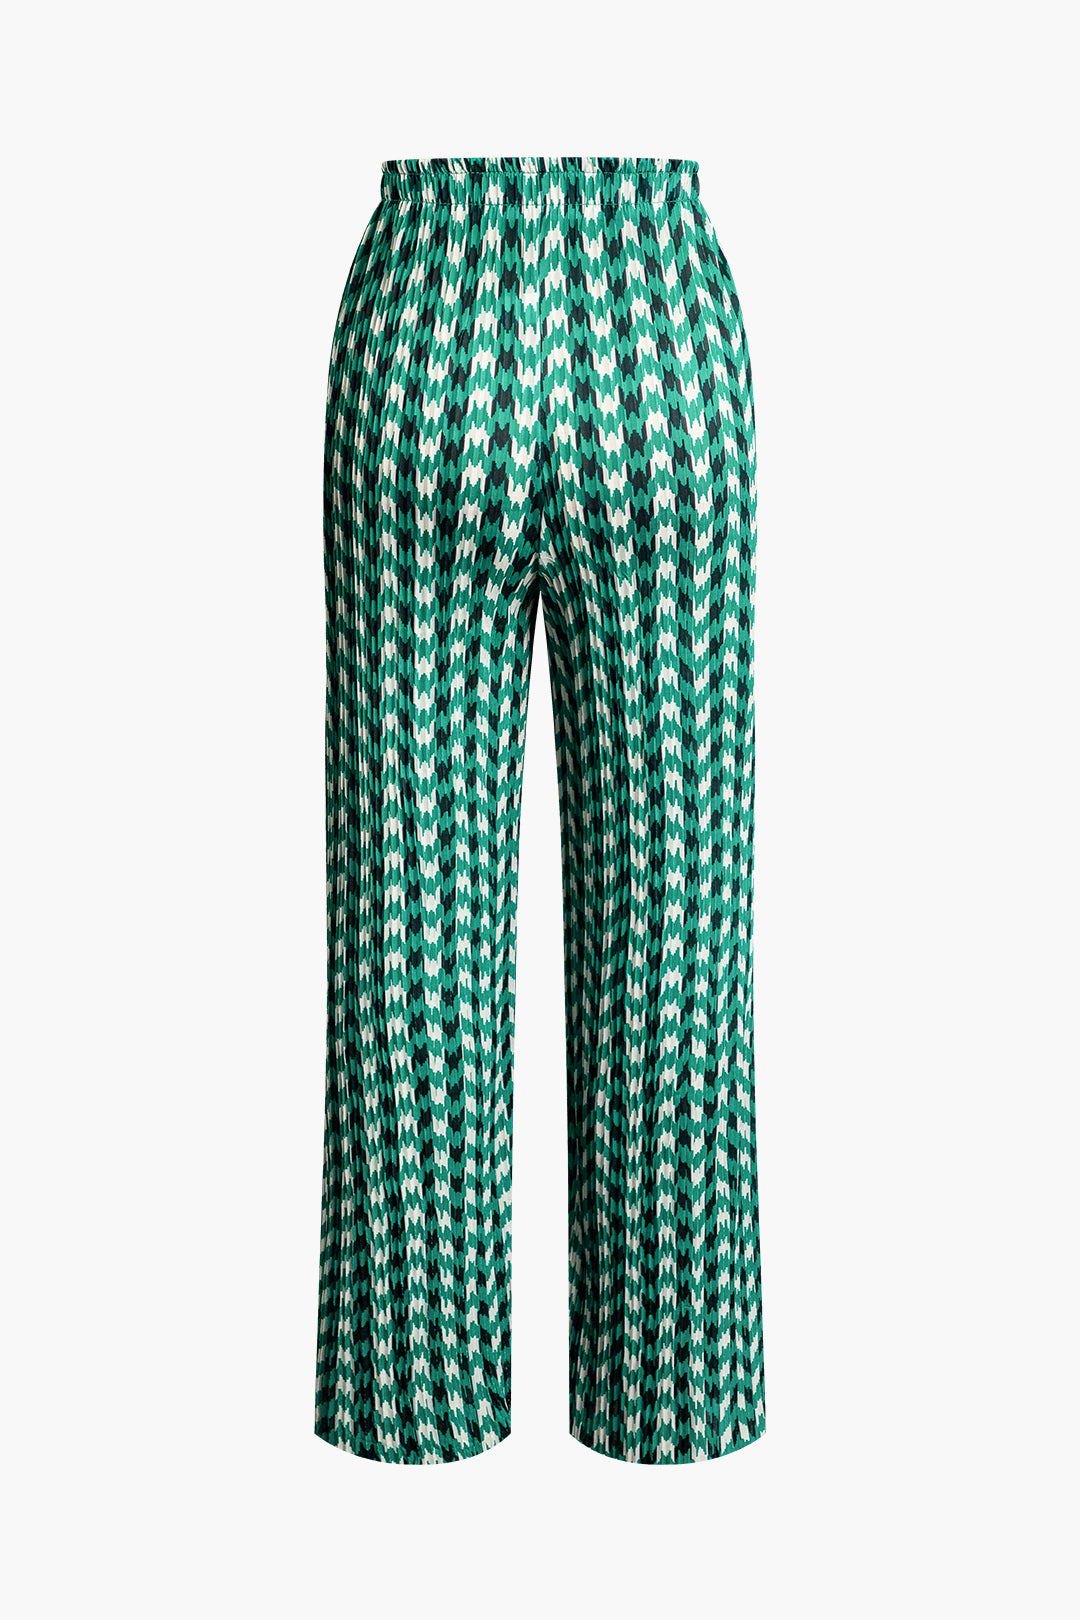 Houndstooth Pattern Pants